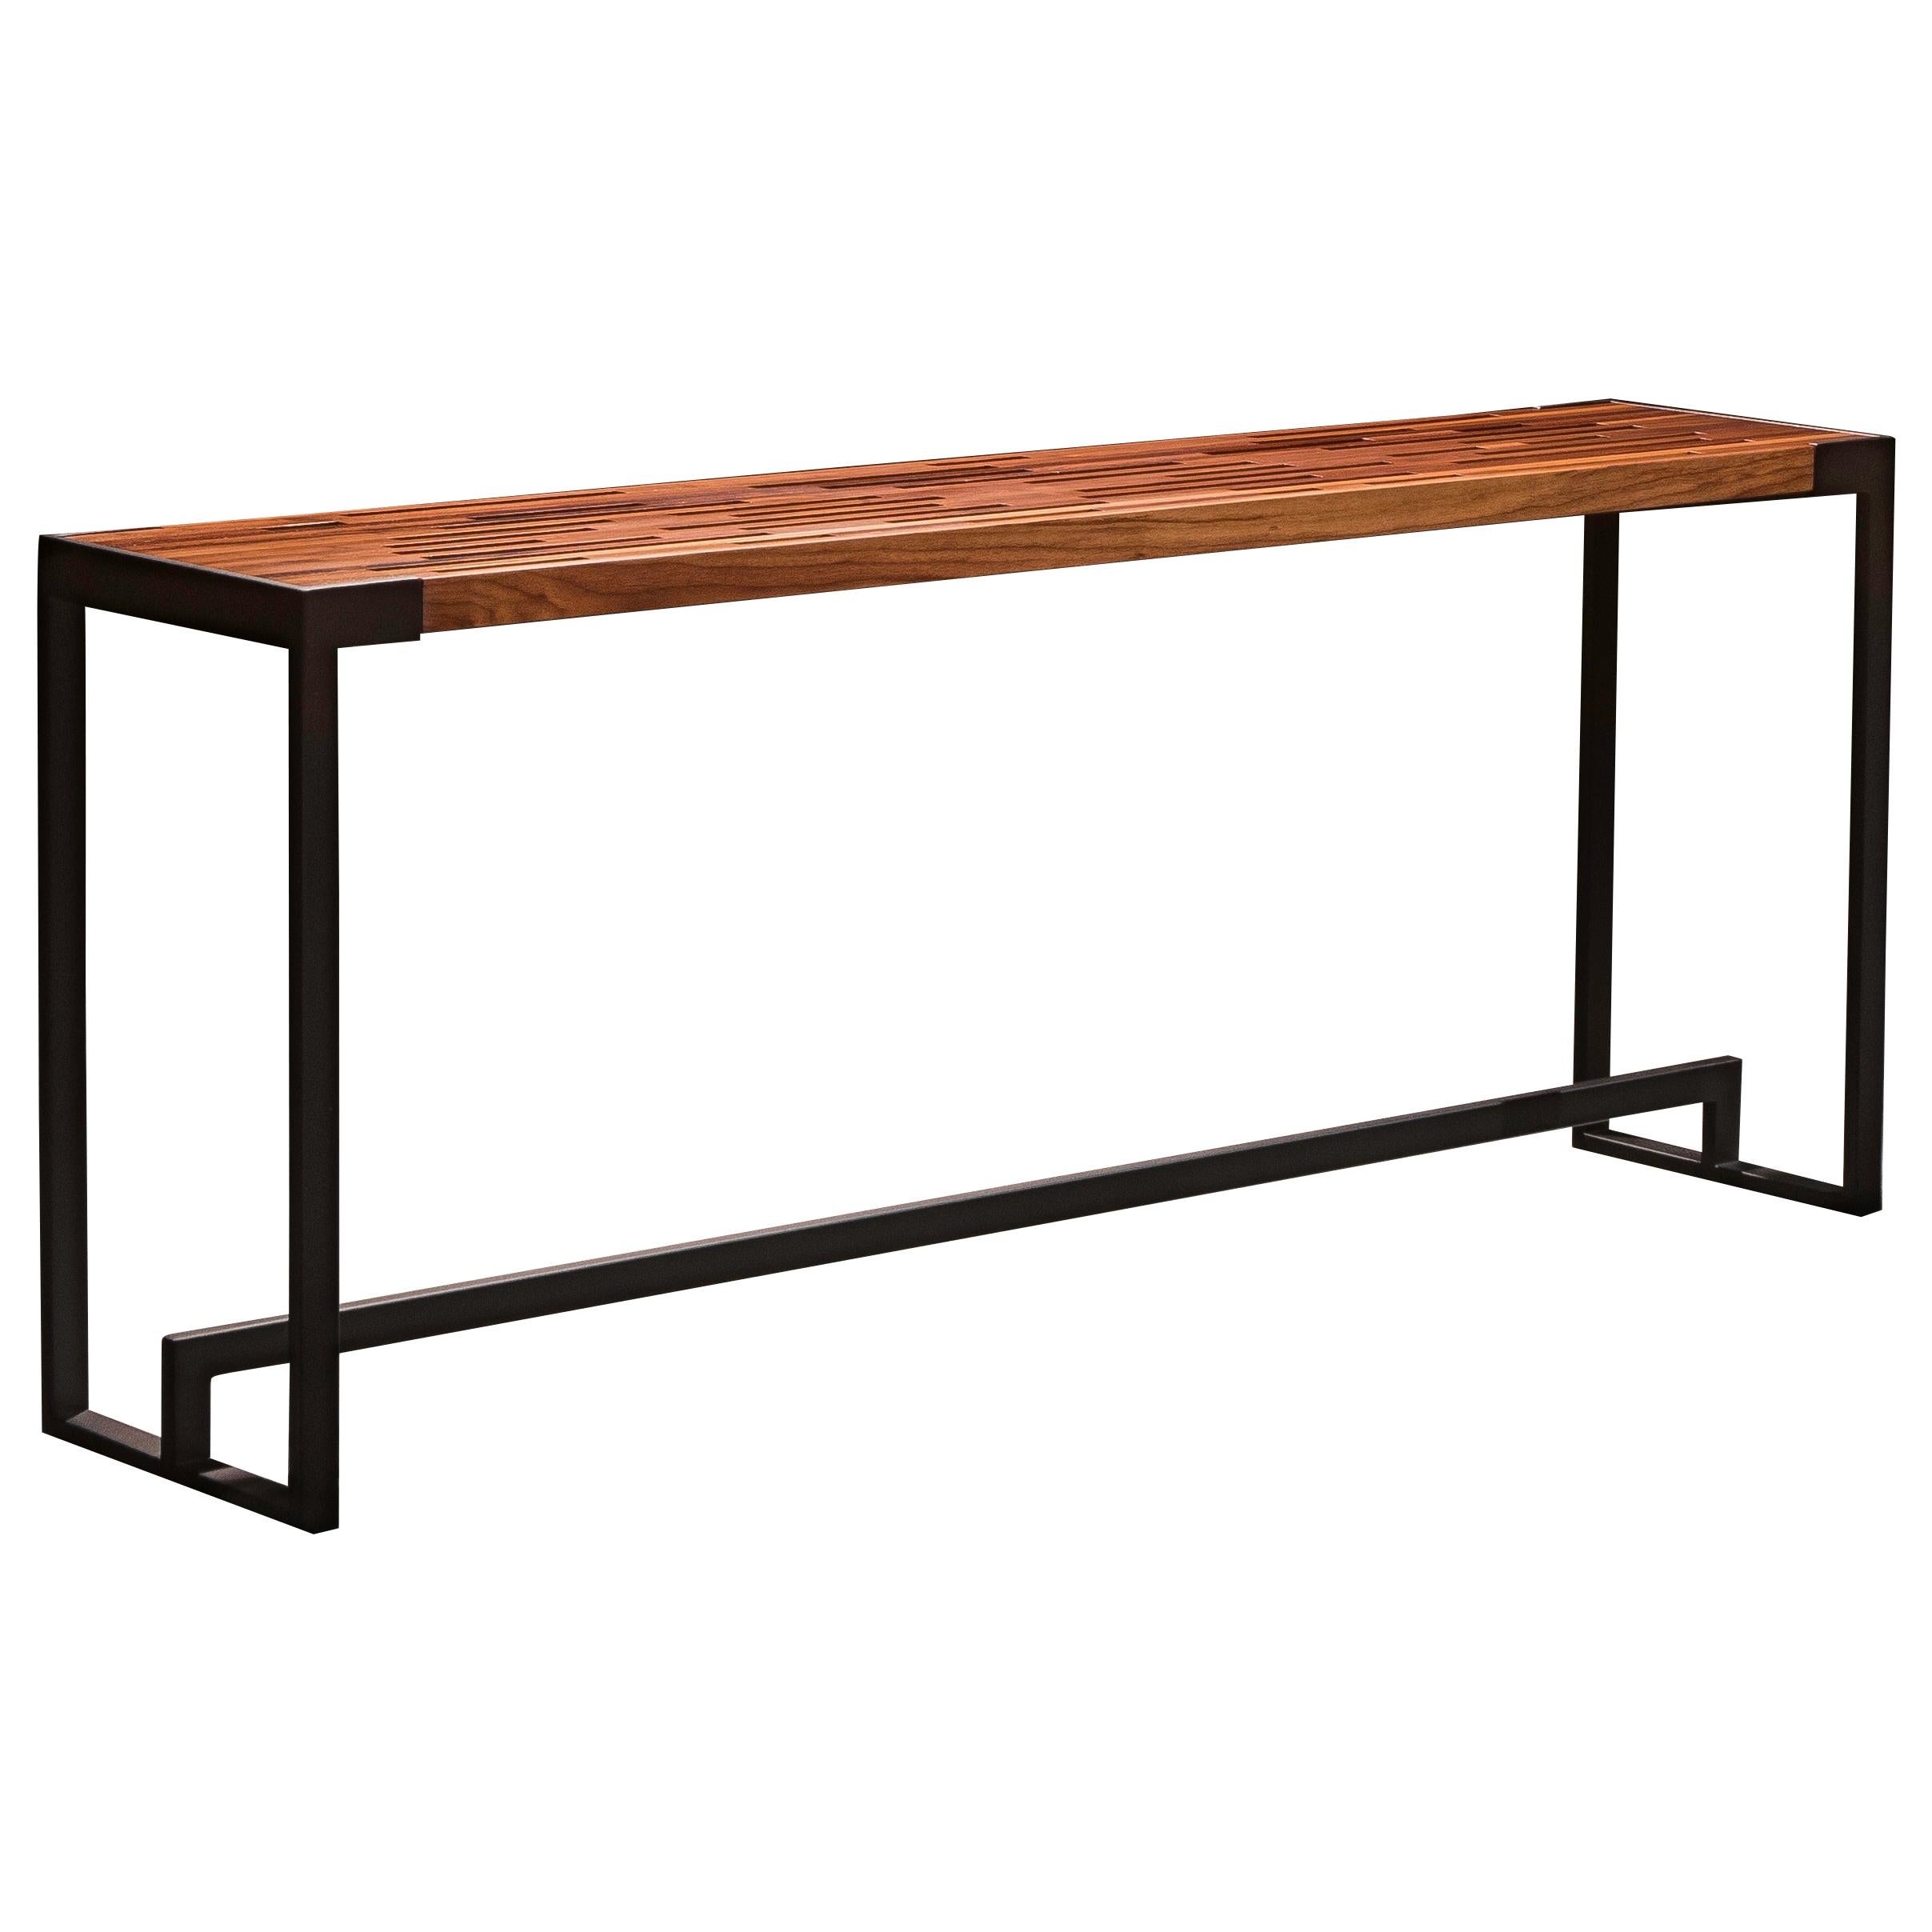 Slotted Solid Walnut Console Table on Black Steel Base "Scripps Console Table"